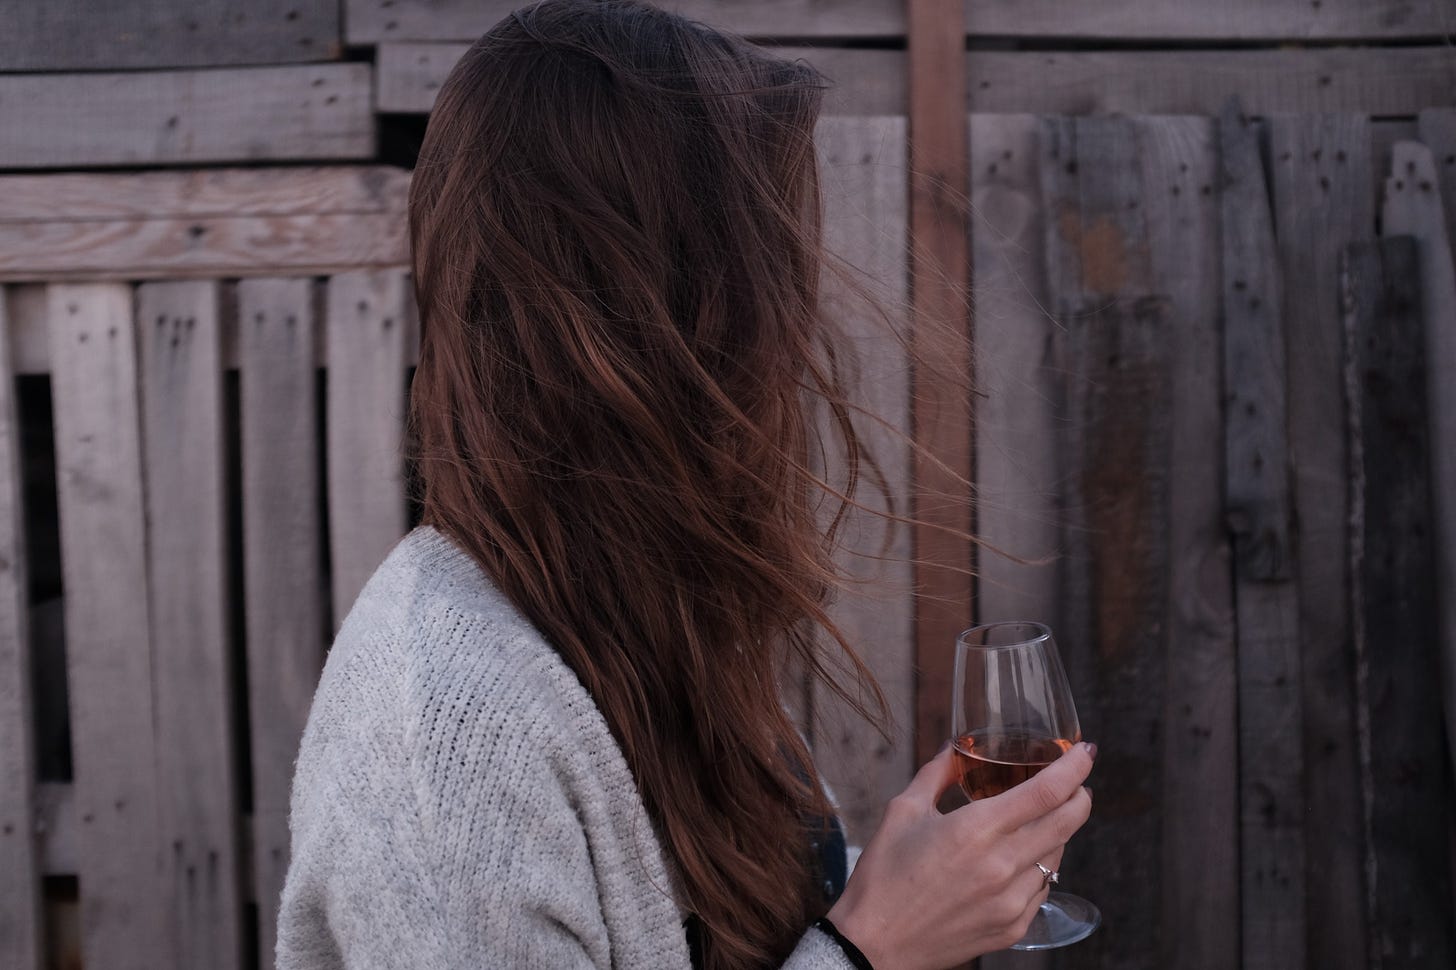 Side profile of a white woman holding a glass of wine, with her long brown hair obscuring her face.